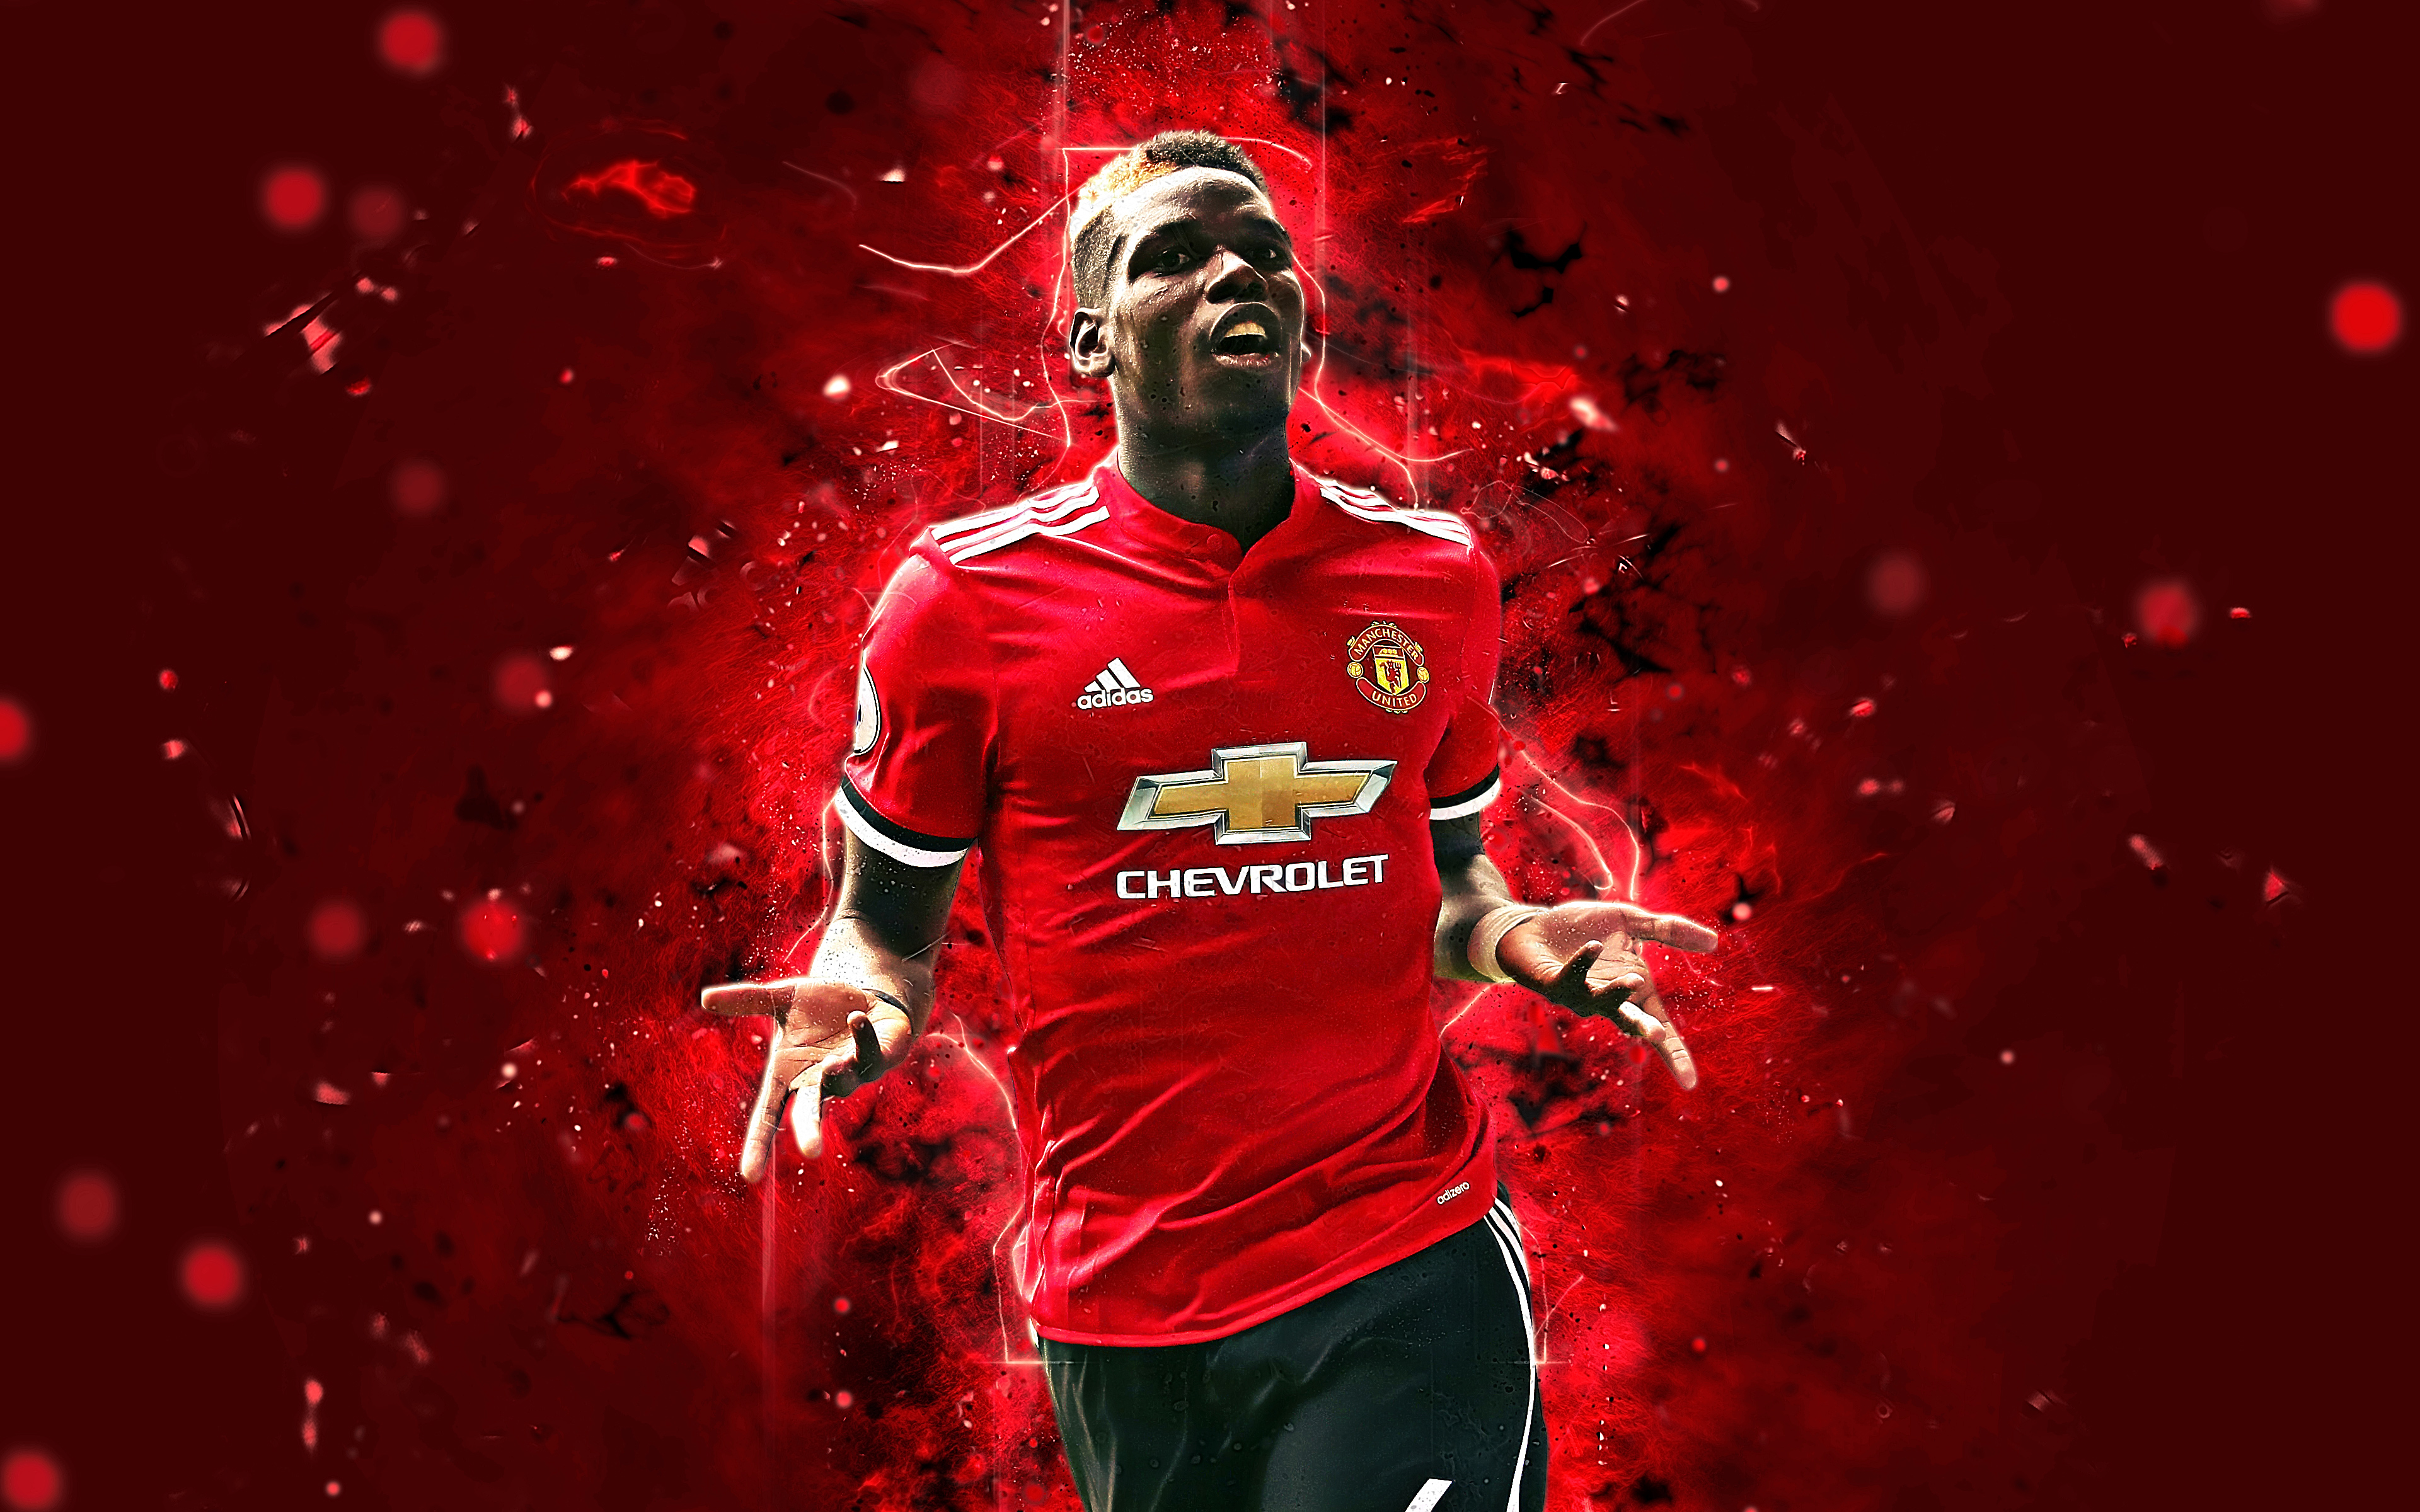 paul pogba wallpaper,football player,red,soccer player,jersey,player